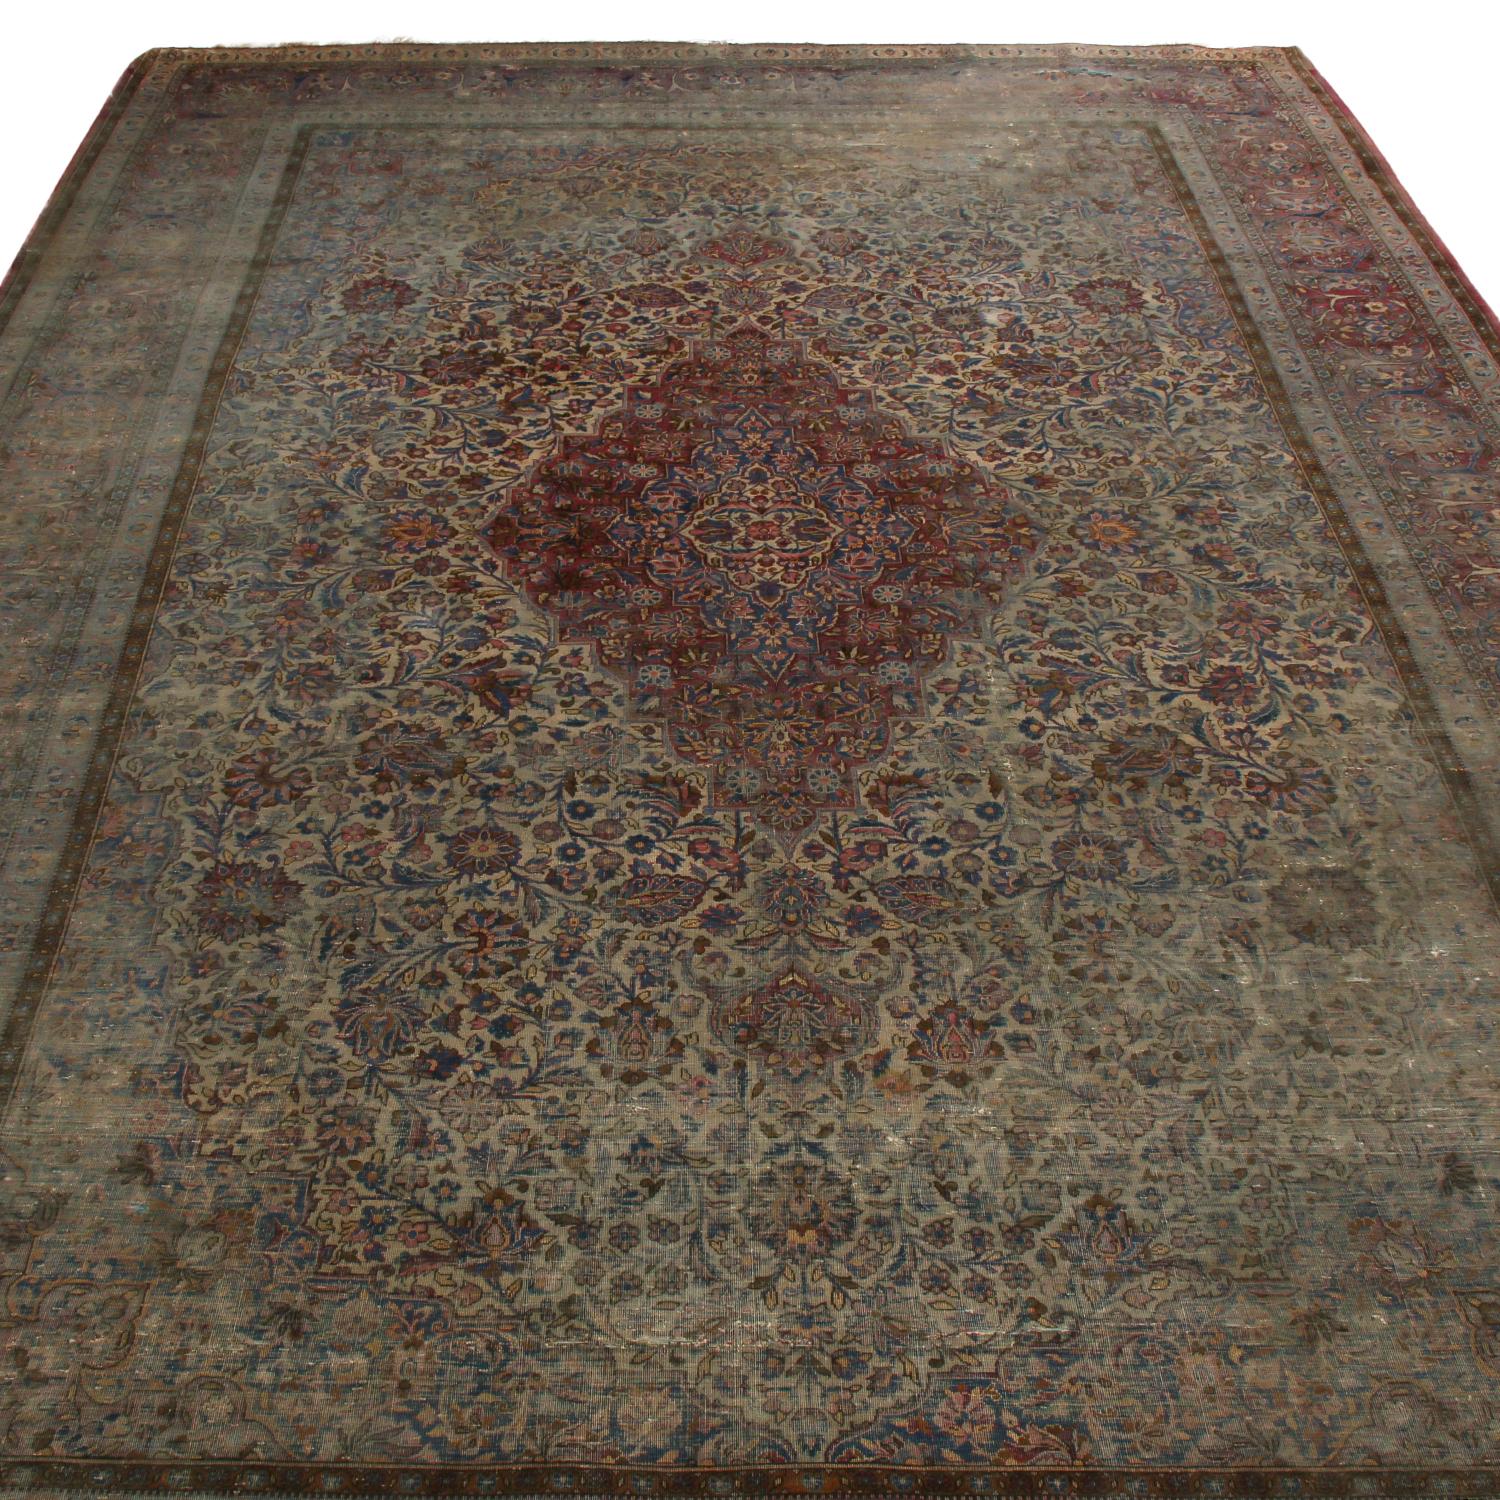 Originating from Persia in 1870, this antique Kashan Persian rug enjoys a medallion-style field design with a rich, finely distributed array of burgundy red, frost blue, and silver-beige colorways complemented by floral elements of pink, purple, and